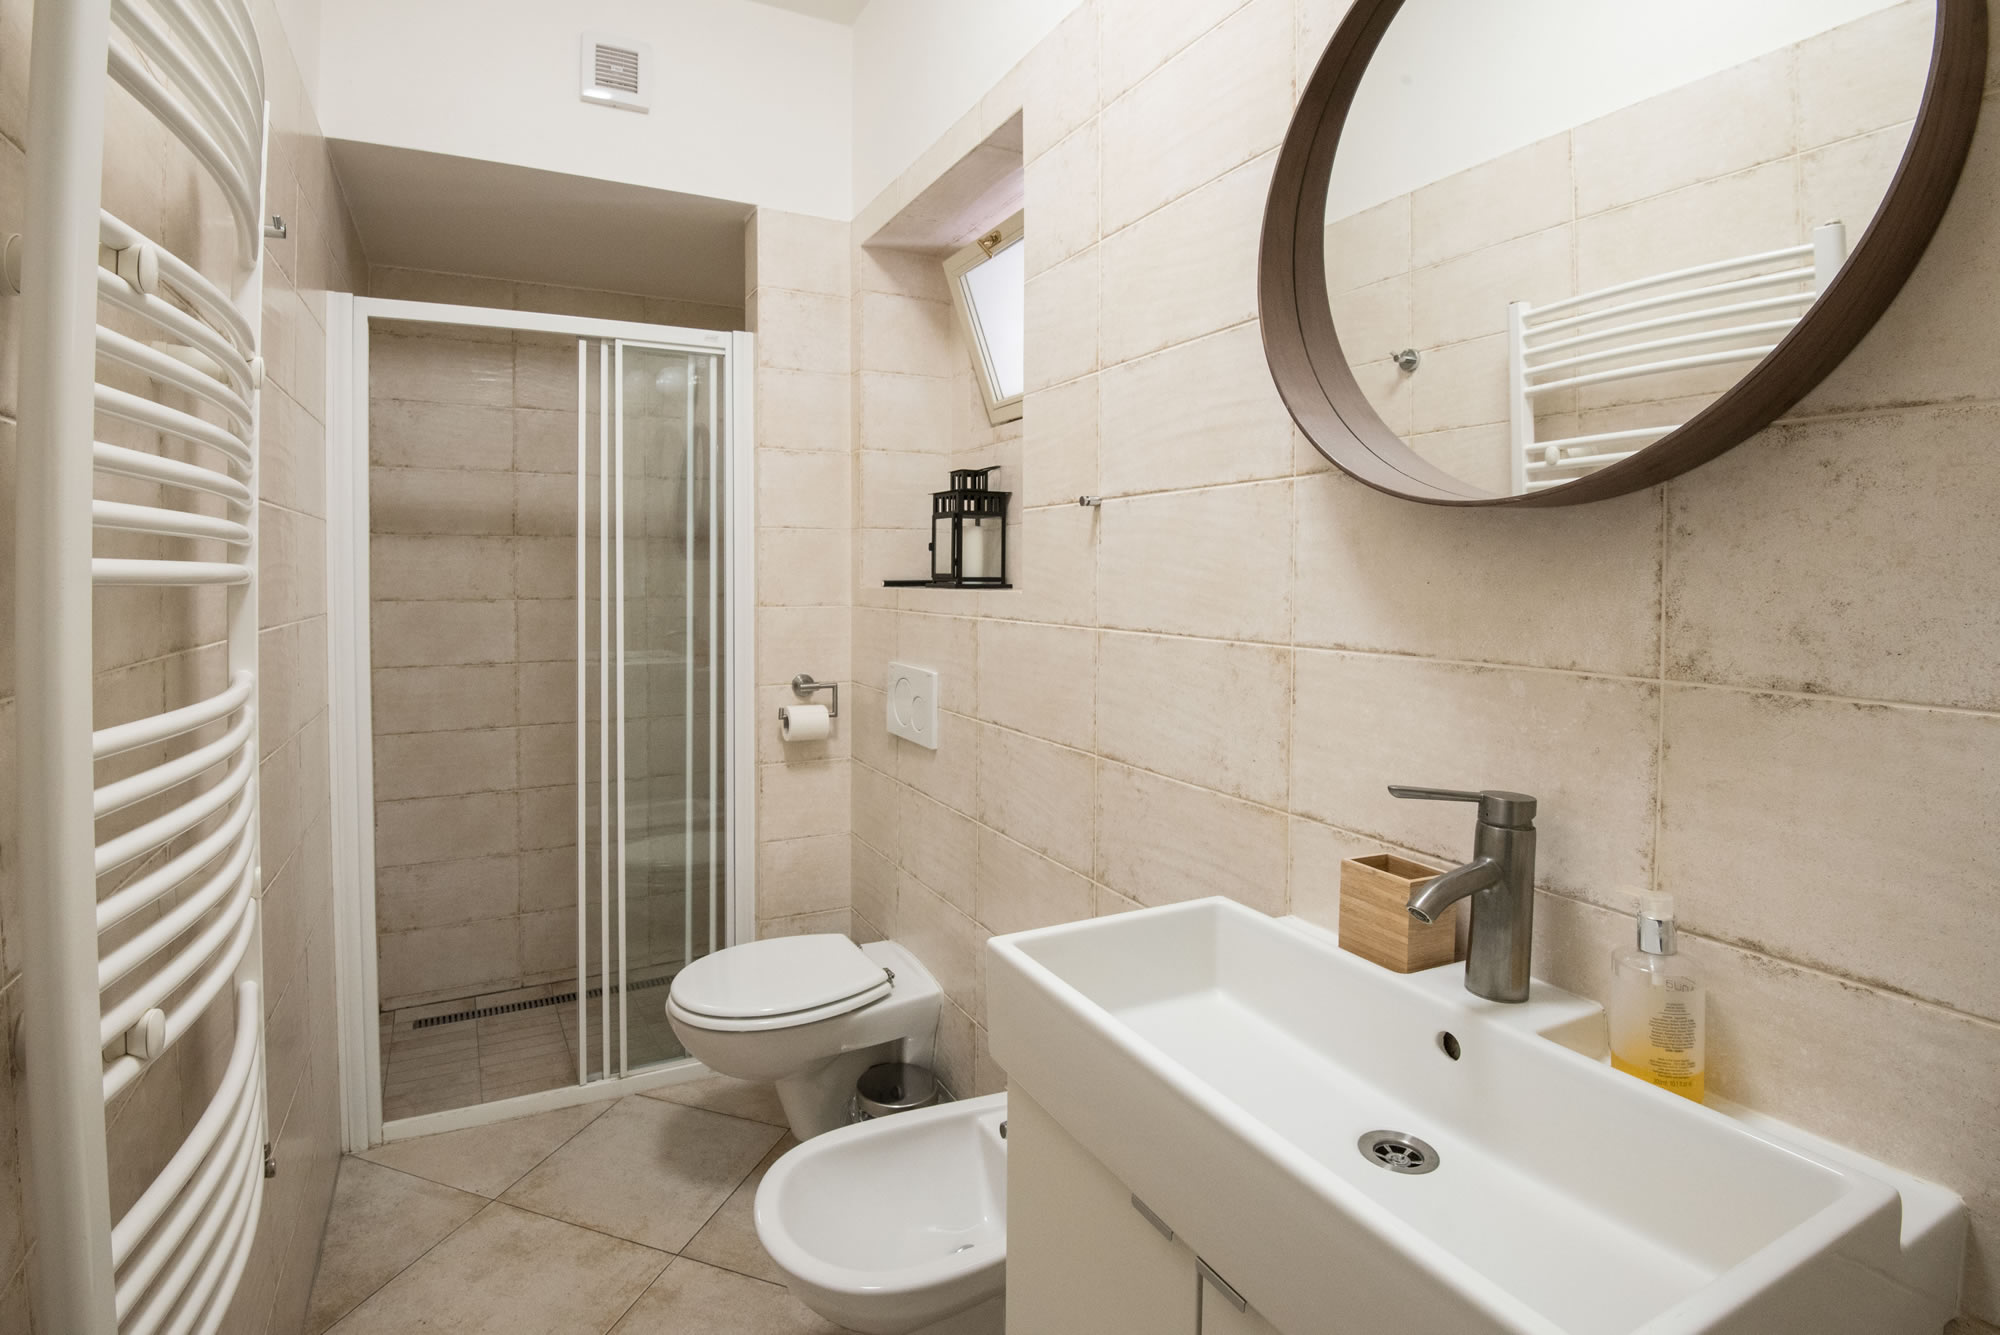 Bathroom with beige tiles on the floor and on the walls. A shower, bidet, toilet and white sink with mirror are in the room.